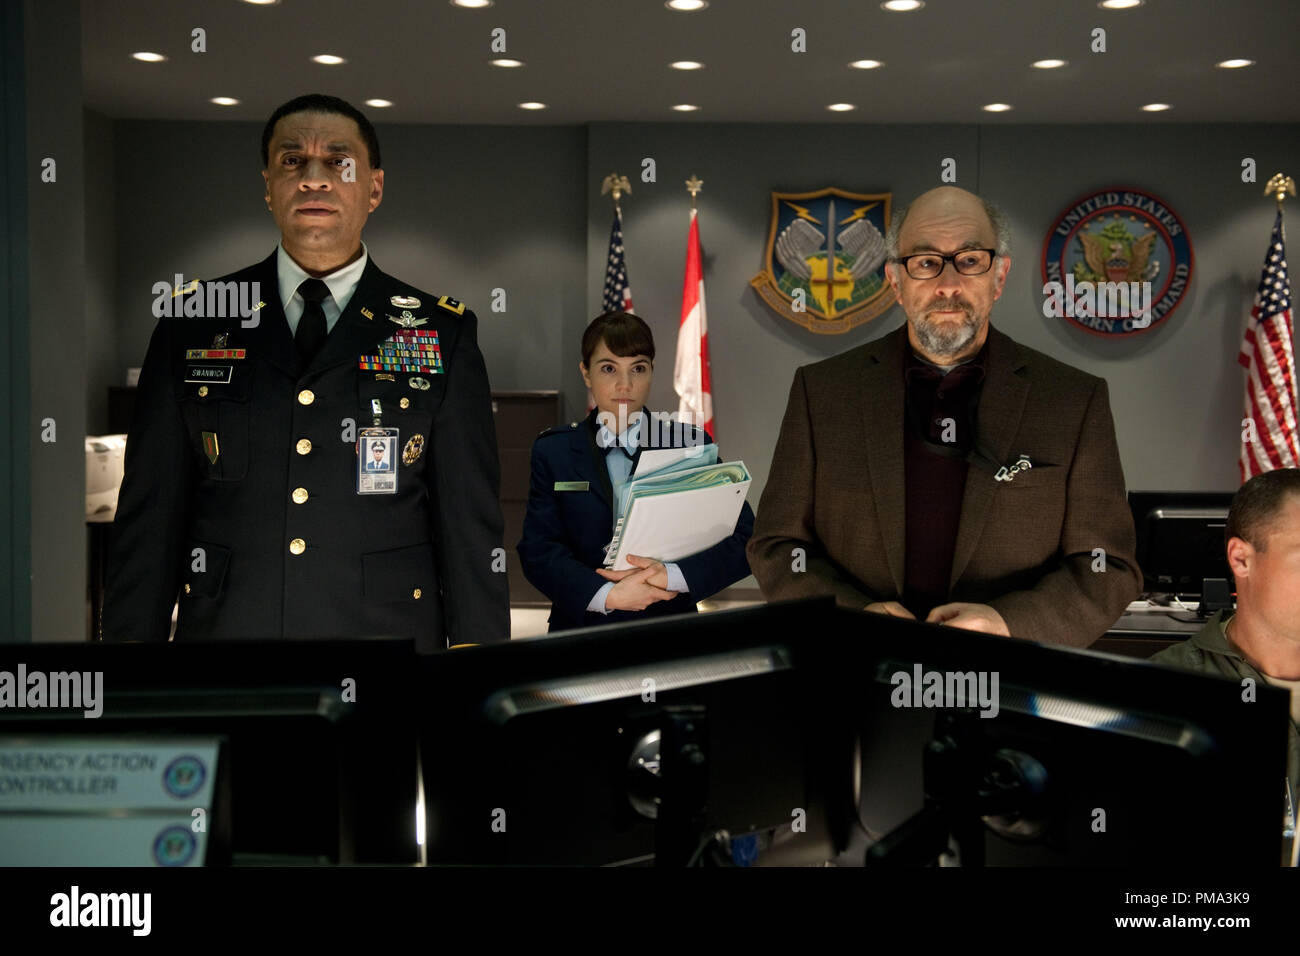 (L-r) HARRY LENNIX as General Swanick, CHRISTINA WREN as Major Carrie Farris and RICHARD SCHIFF as Dr. Emil Hamilton in Warner Bros. Pictures’ and Legendary Pictures’ action adventure “MAN OF STEEL,” a Warner Bros. Pictures release. Stock Photo